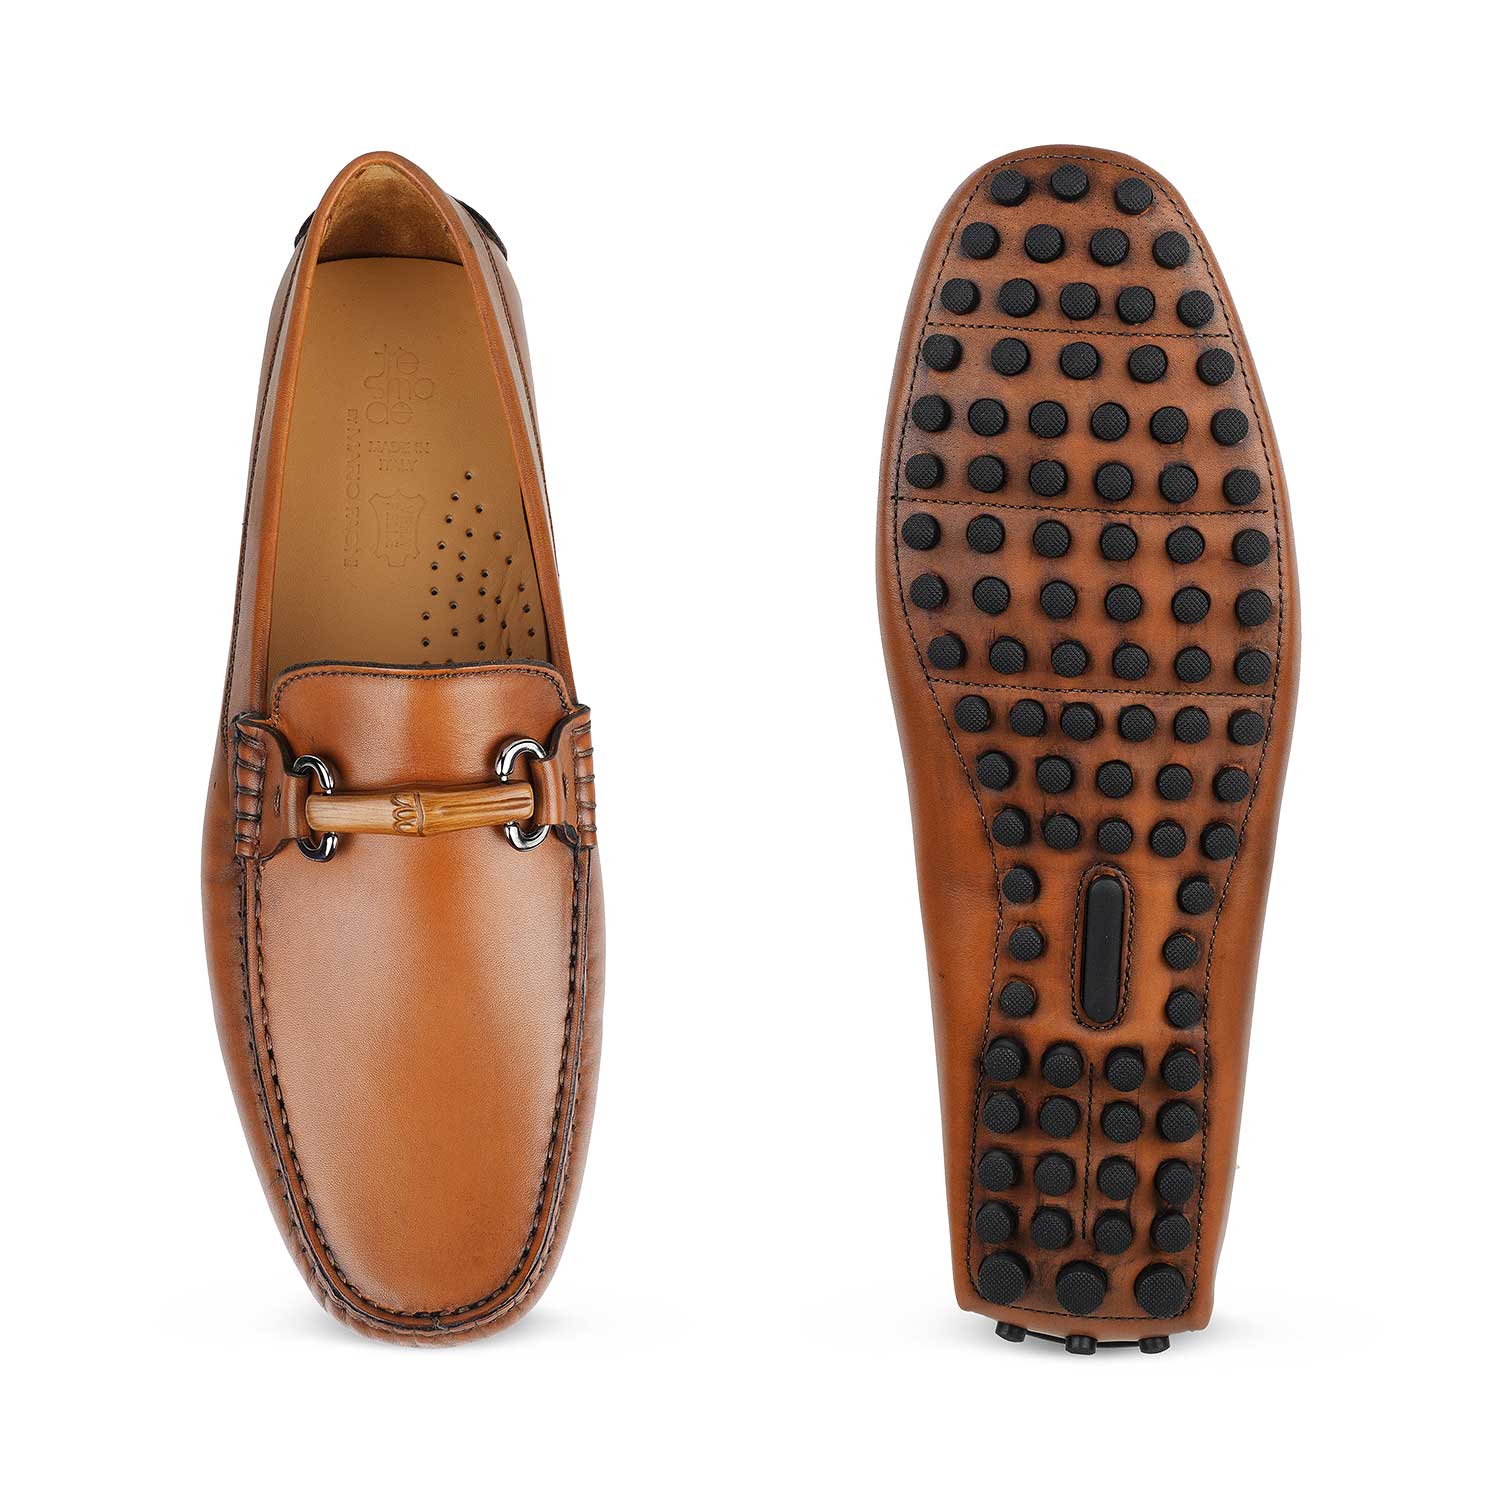 The Mirocleto Tan Men's Handcrafted Leather Driving Loafers Tresmode